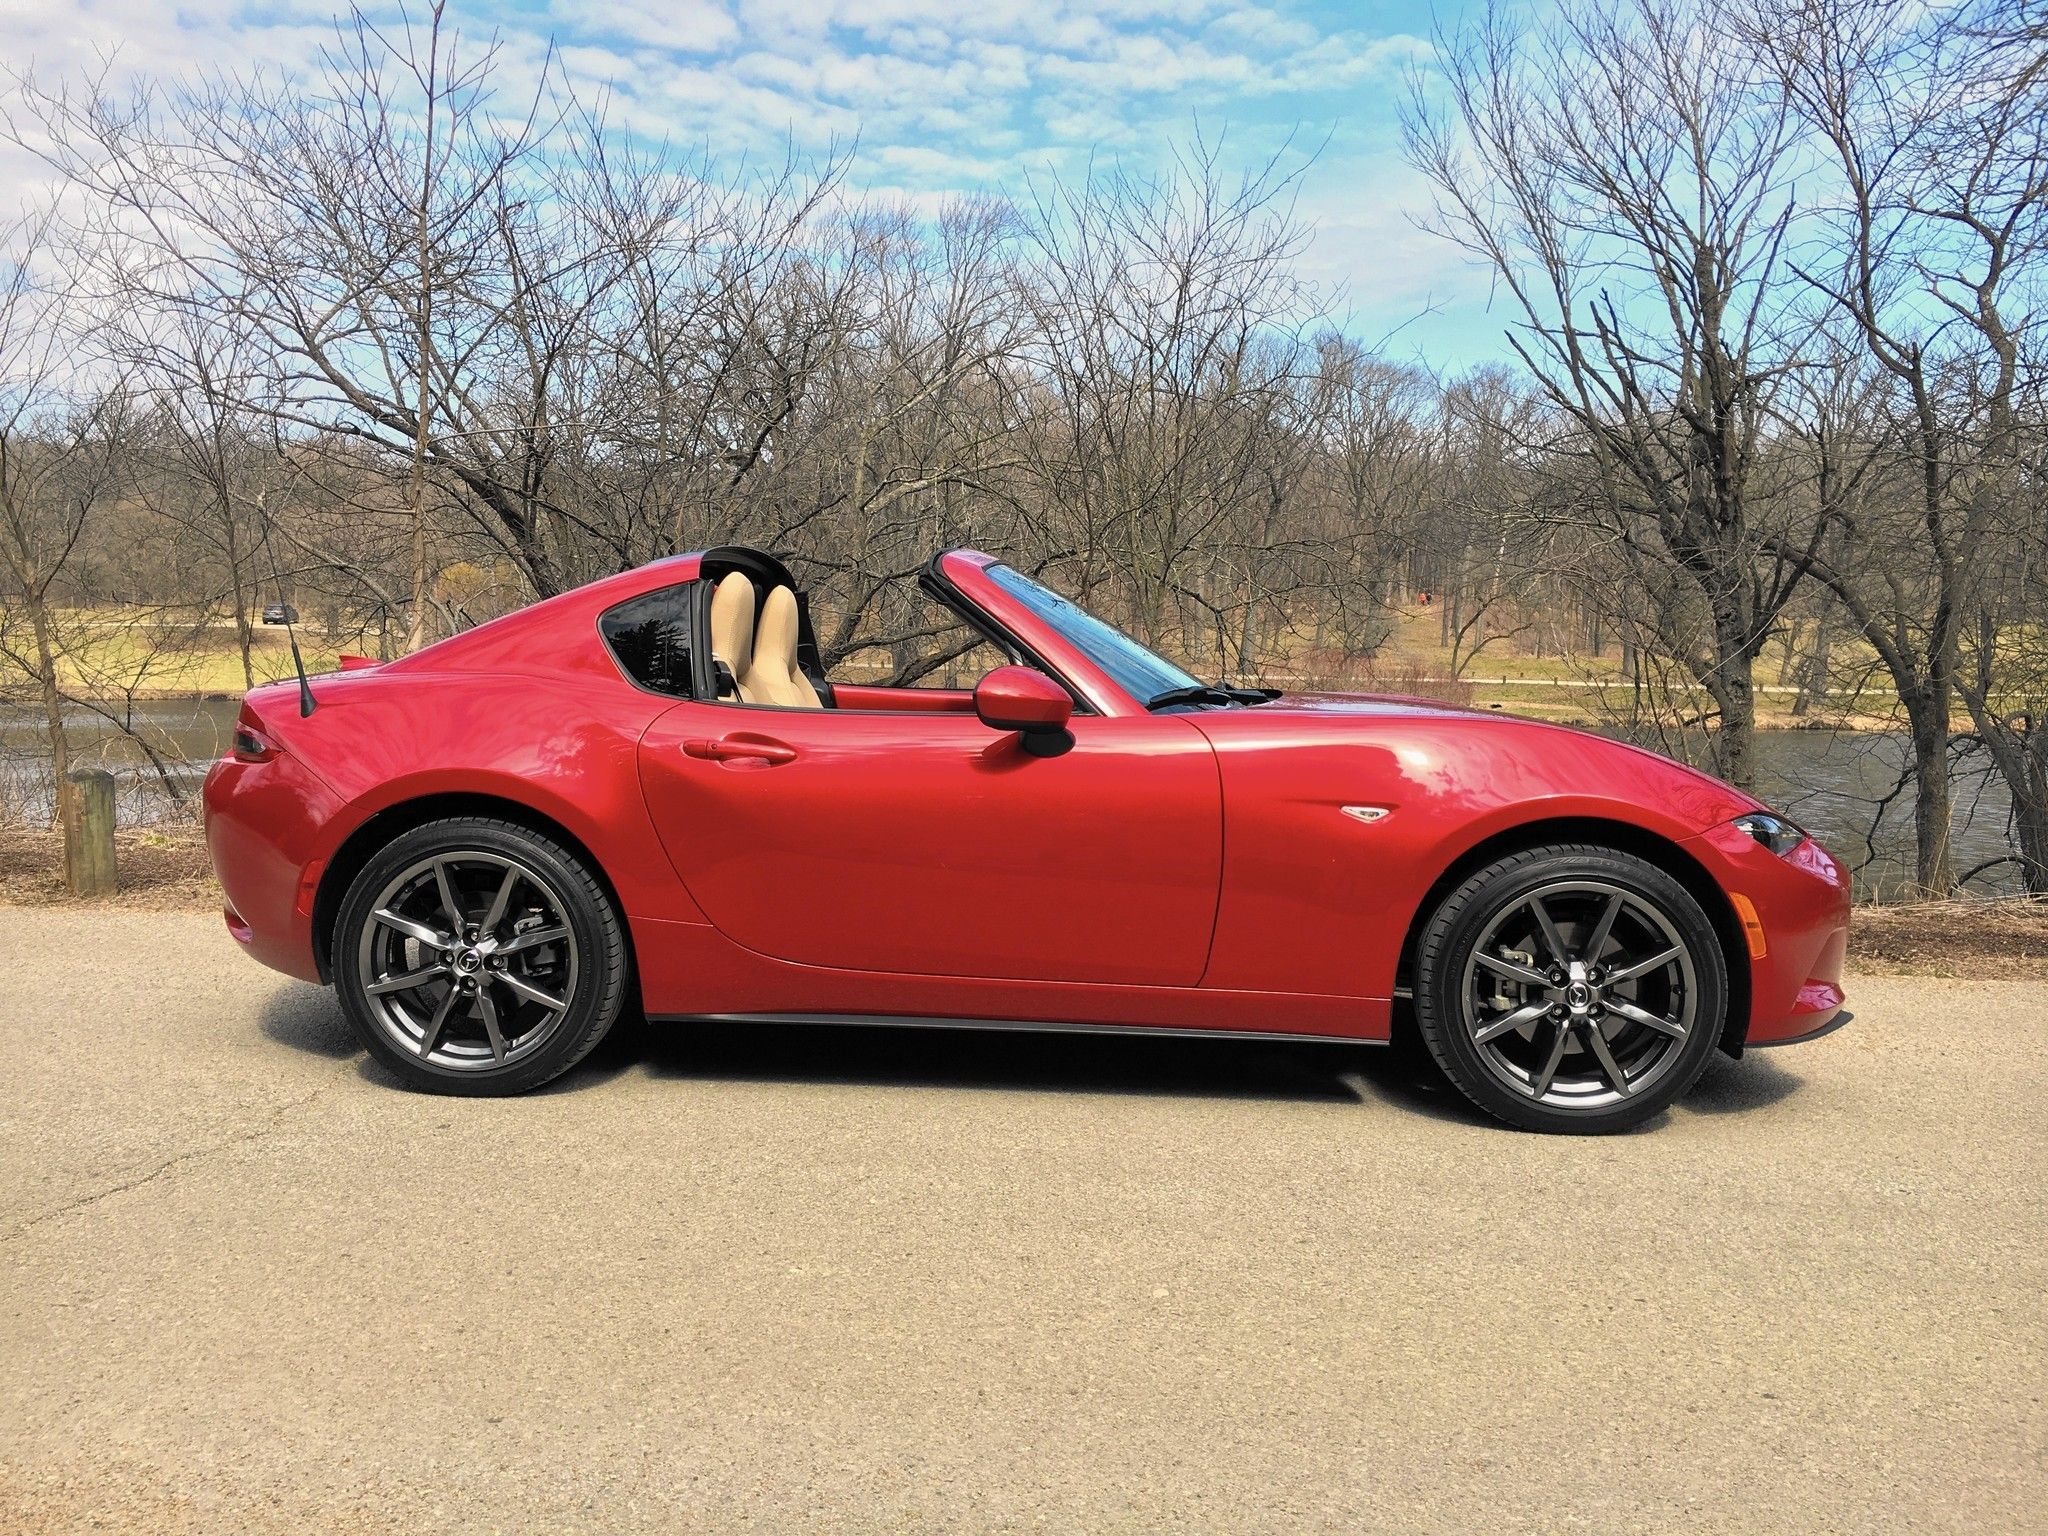 Red Mazda Miata Fastback in front of bare trees, side view